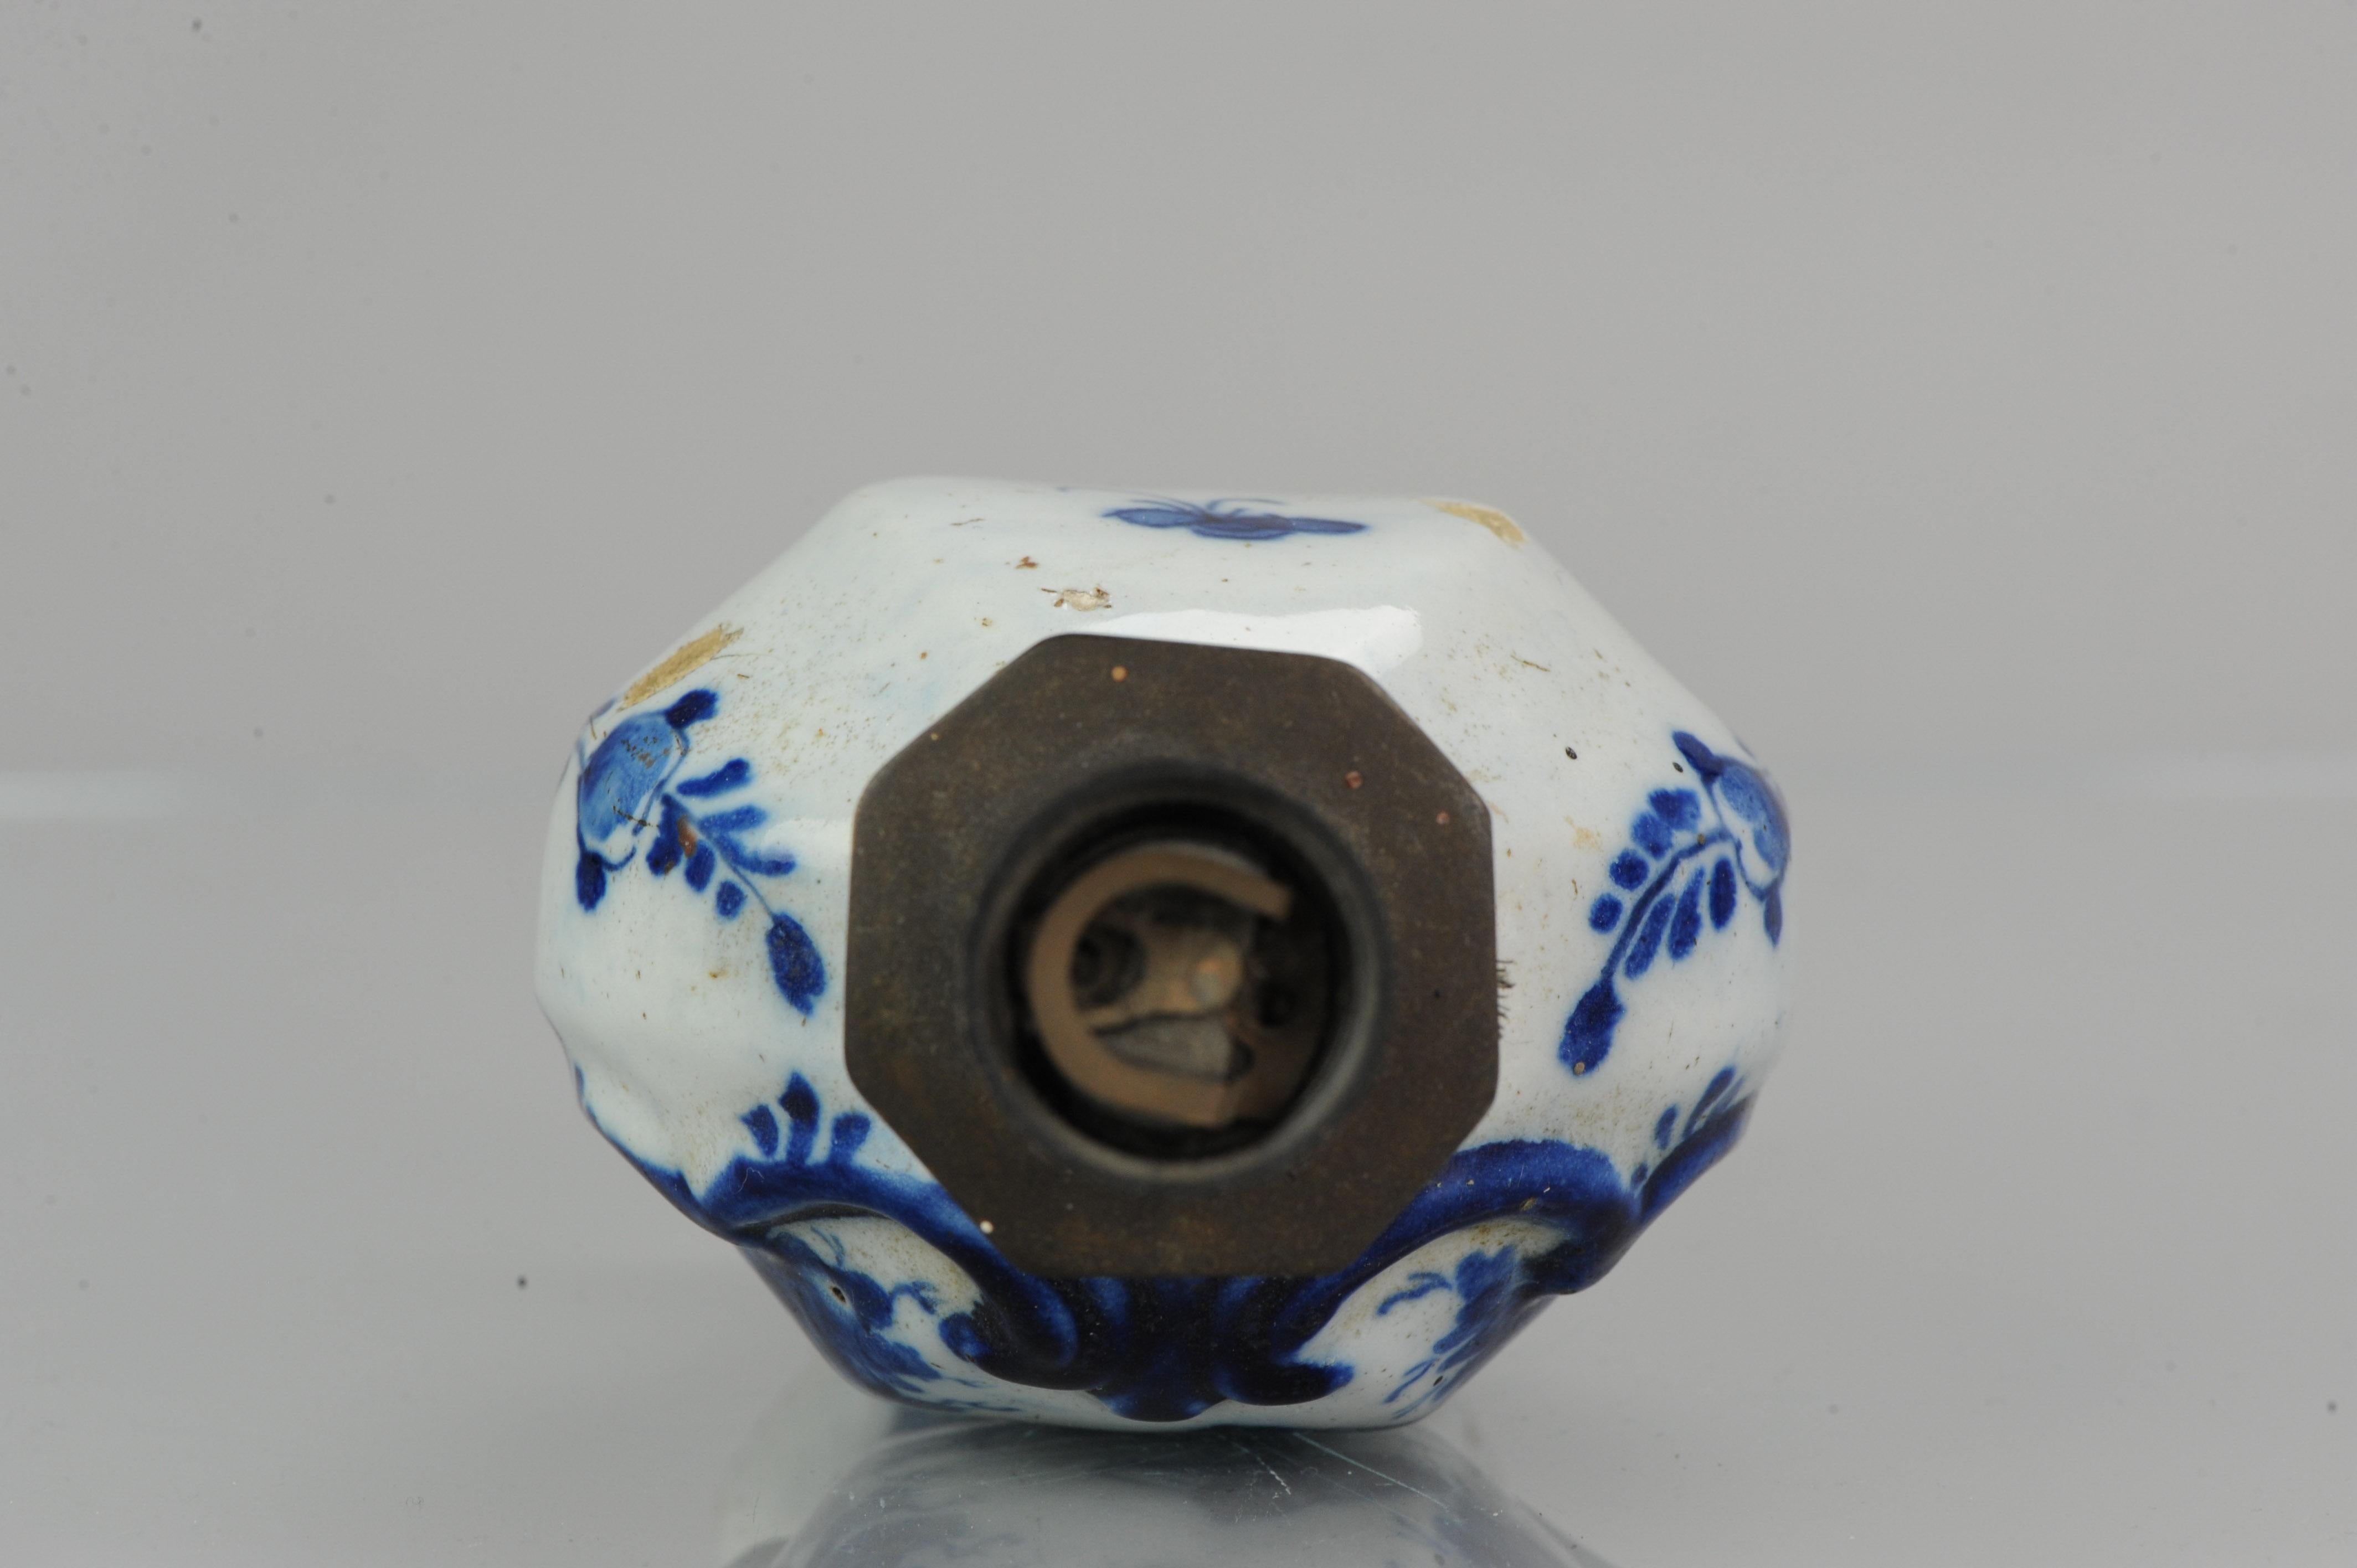 Antique Dutch Delft or German Vase Faience or Delftware Delft Blue, 17/18th C In Good Condition For Sale In Amsterdam, Noord Holland